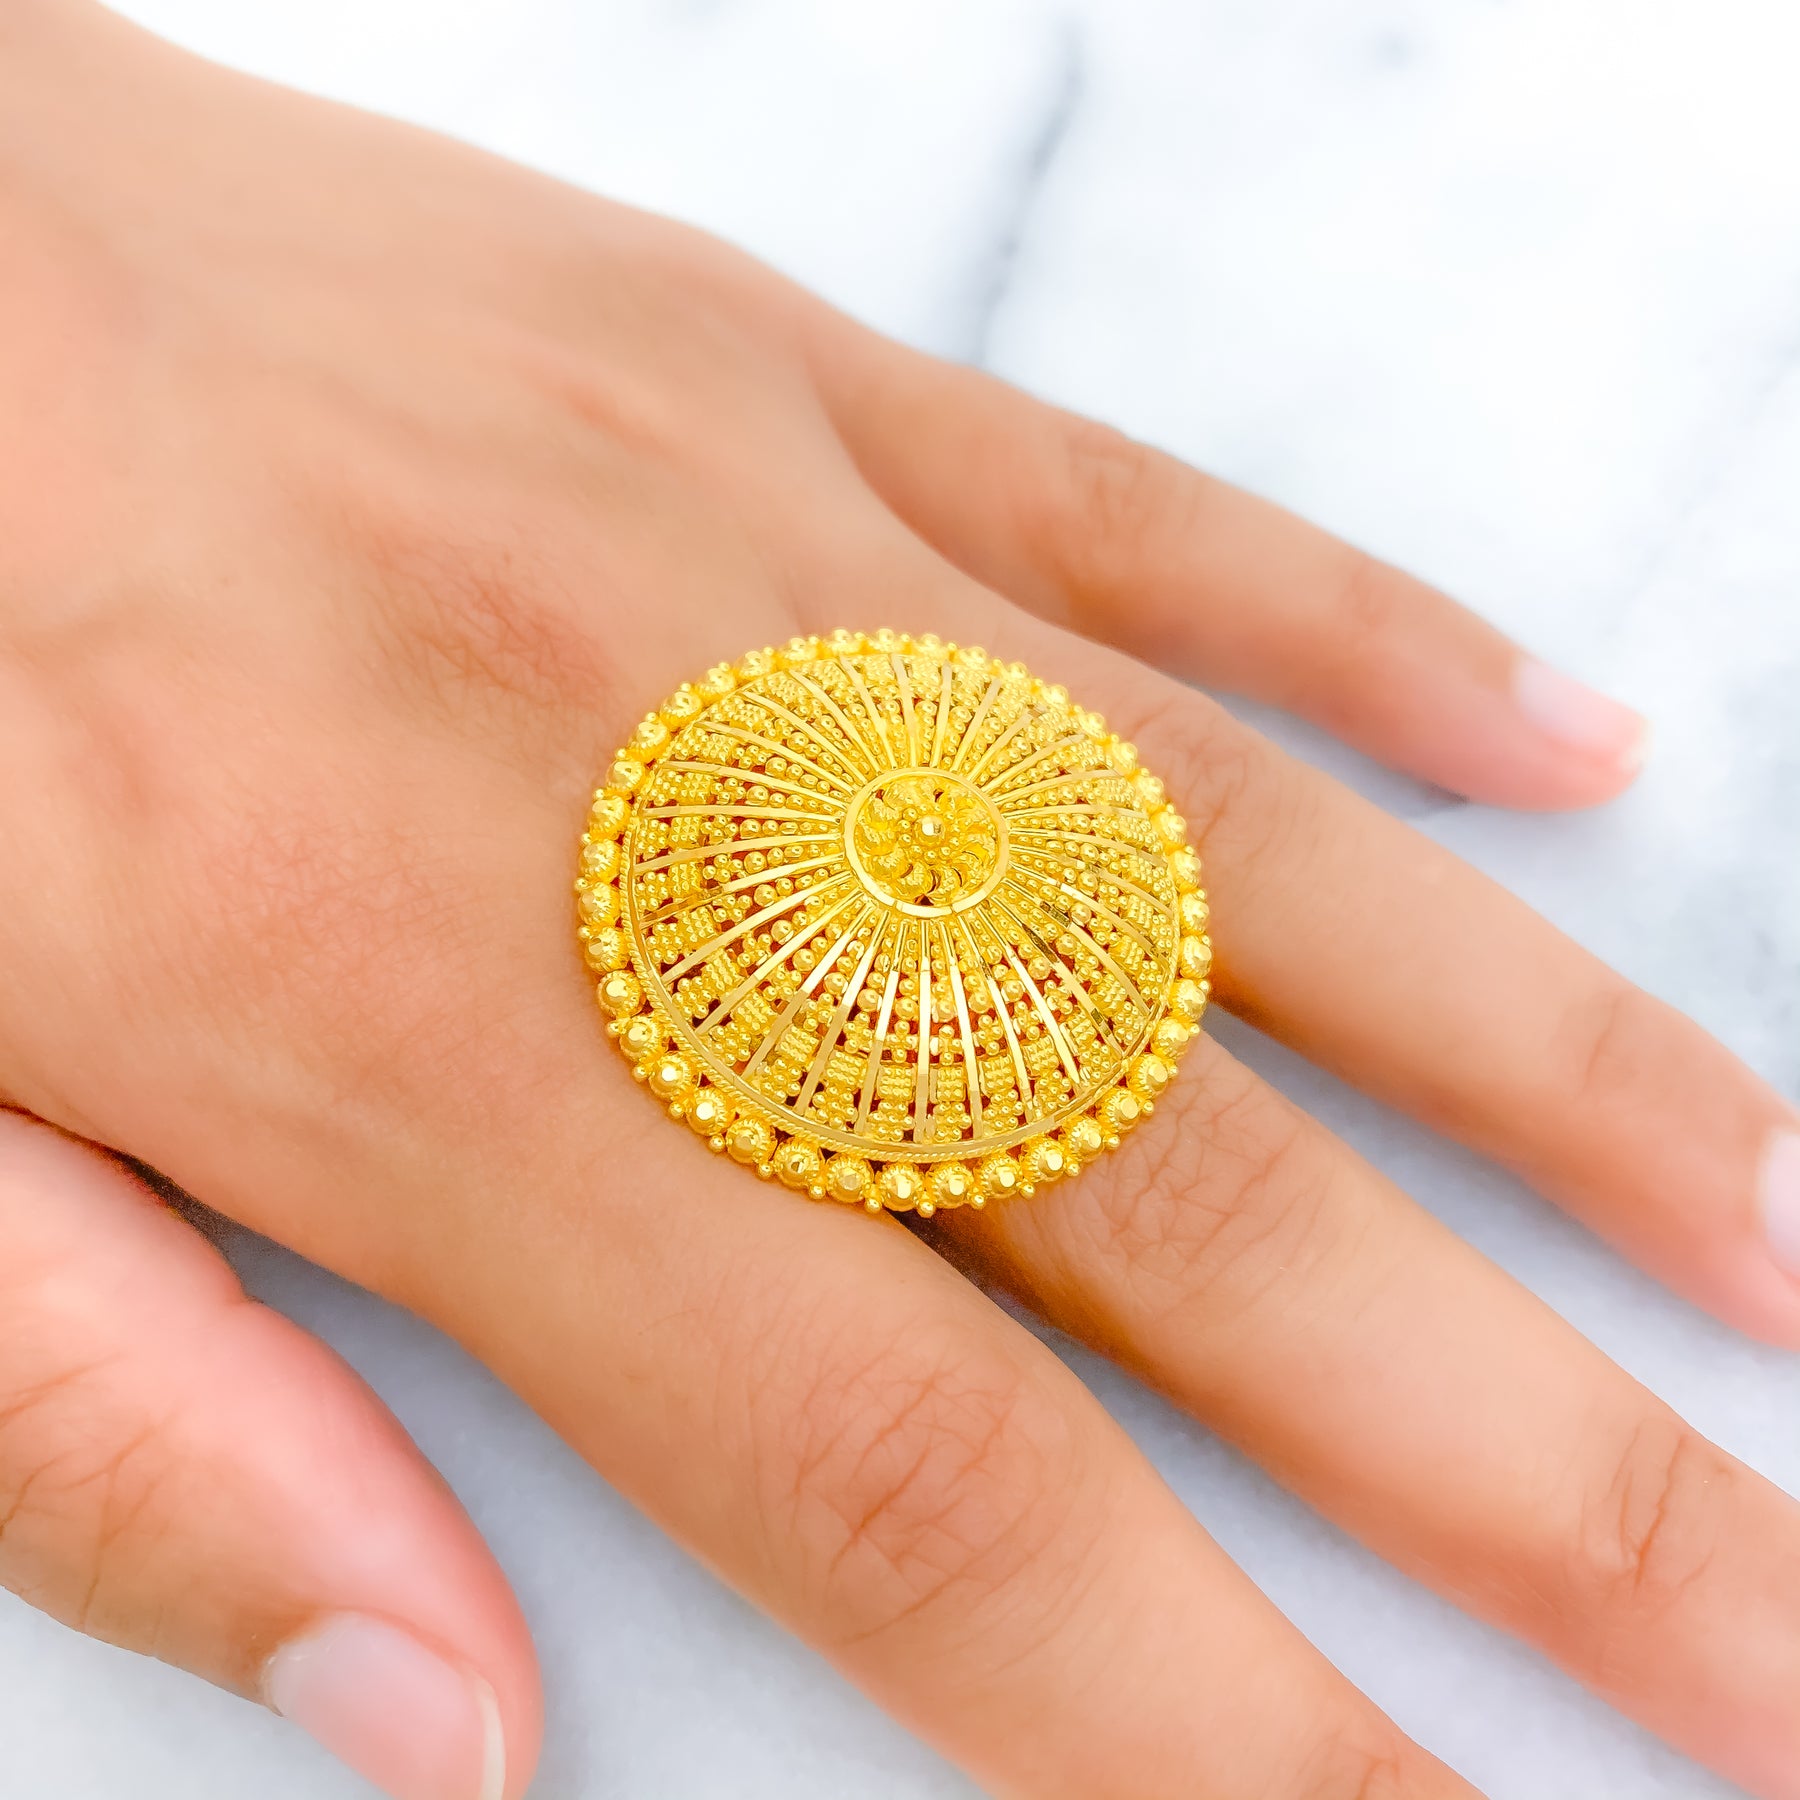 Umbrella ring design | Gold bangles for women, Gold rings fashion, Mens gold  jewelry